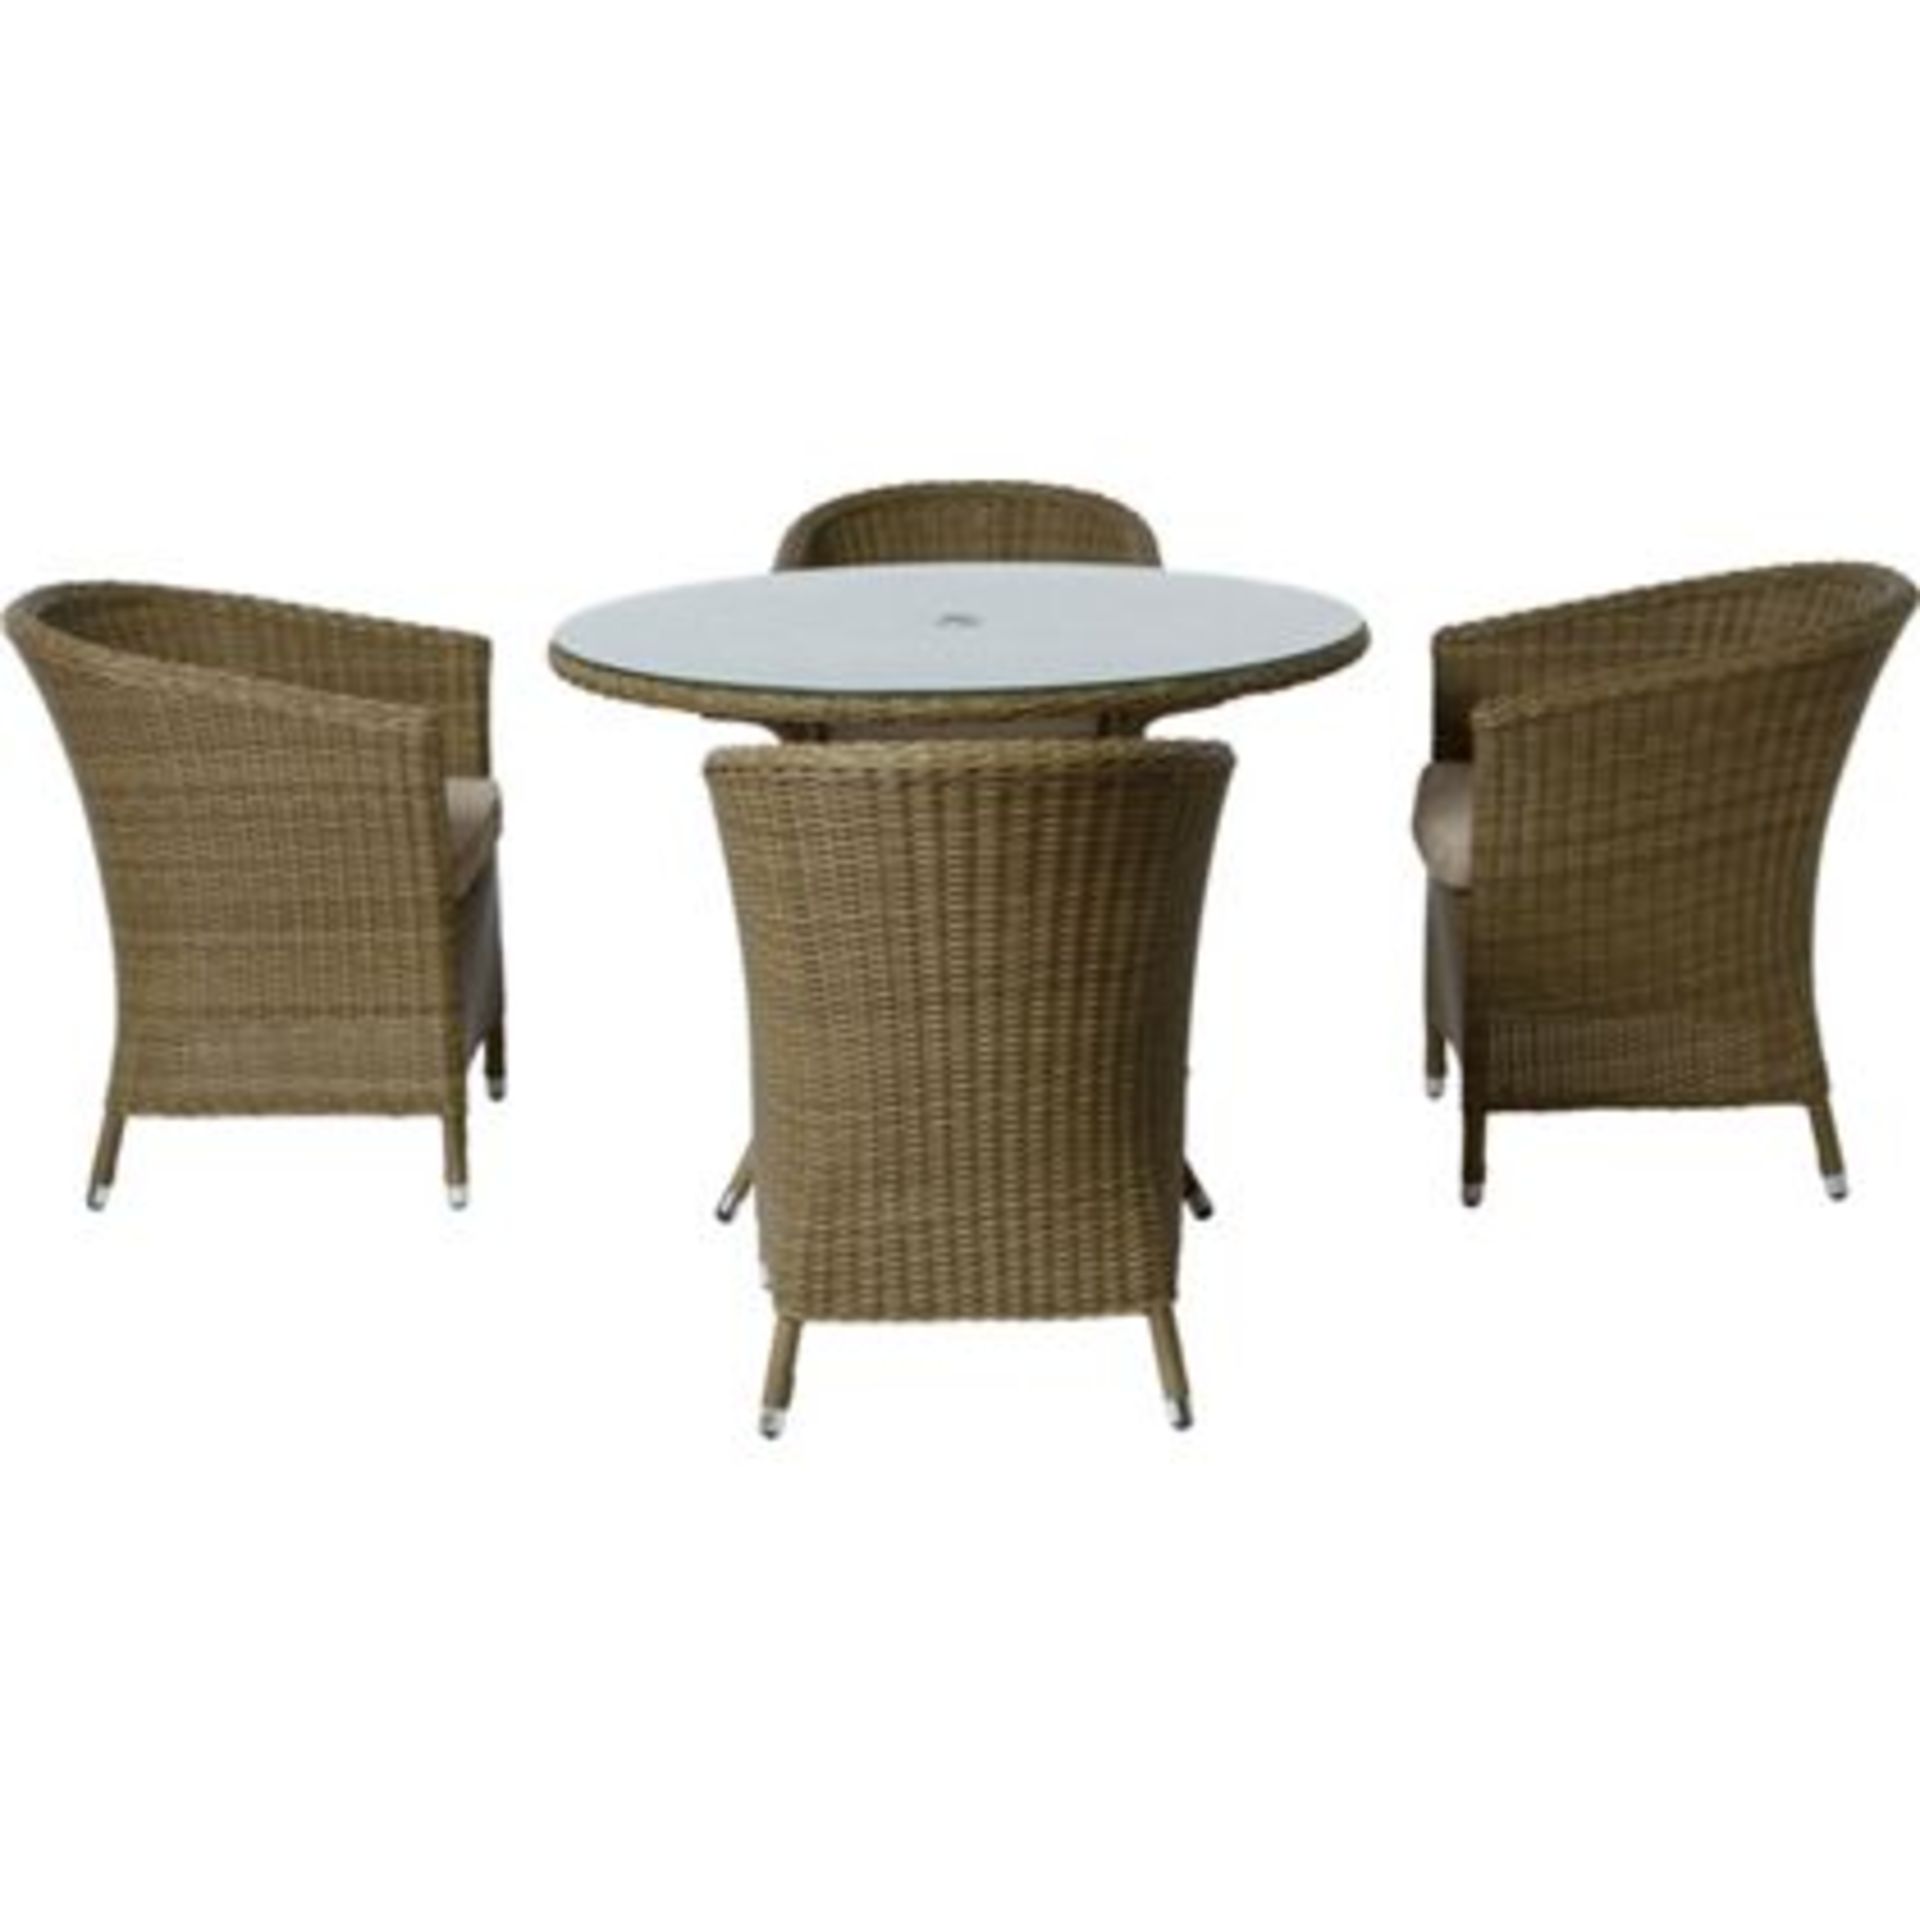 New Worcester 4 Seater Rattan Effect Garden Furniture Set. RRP £599.99. ade from hand woven - Image 4 of 5